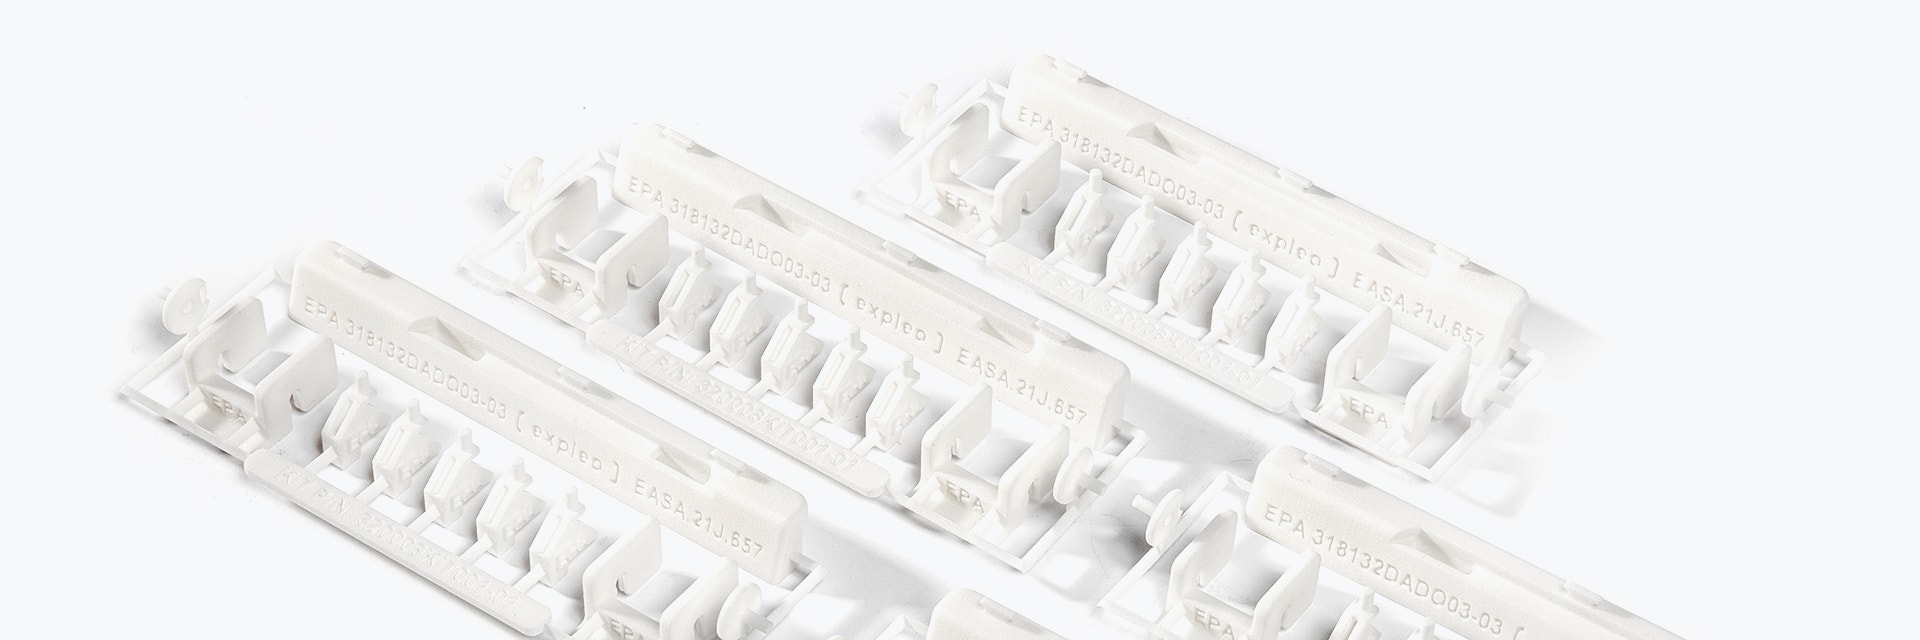 A series of 3D-printed repair kits with EASA 21.J quality labels. The kit contains small white plastic parts made of flame-retardant polyamide, designed by Expleo. These parts are used to replace commonly broken latches on Boeing 737 dado panels. 